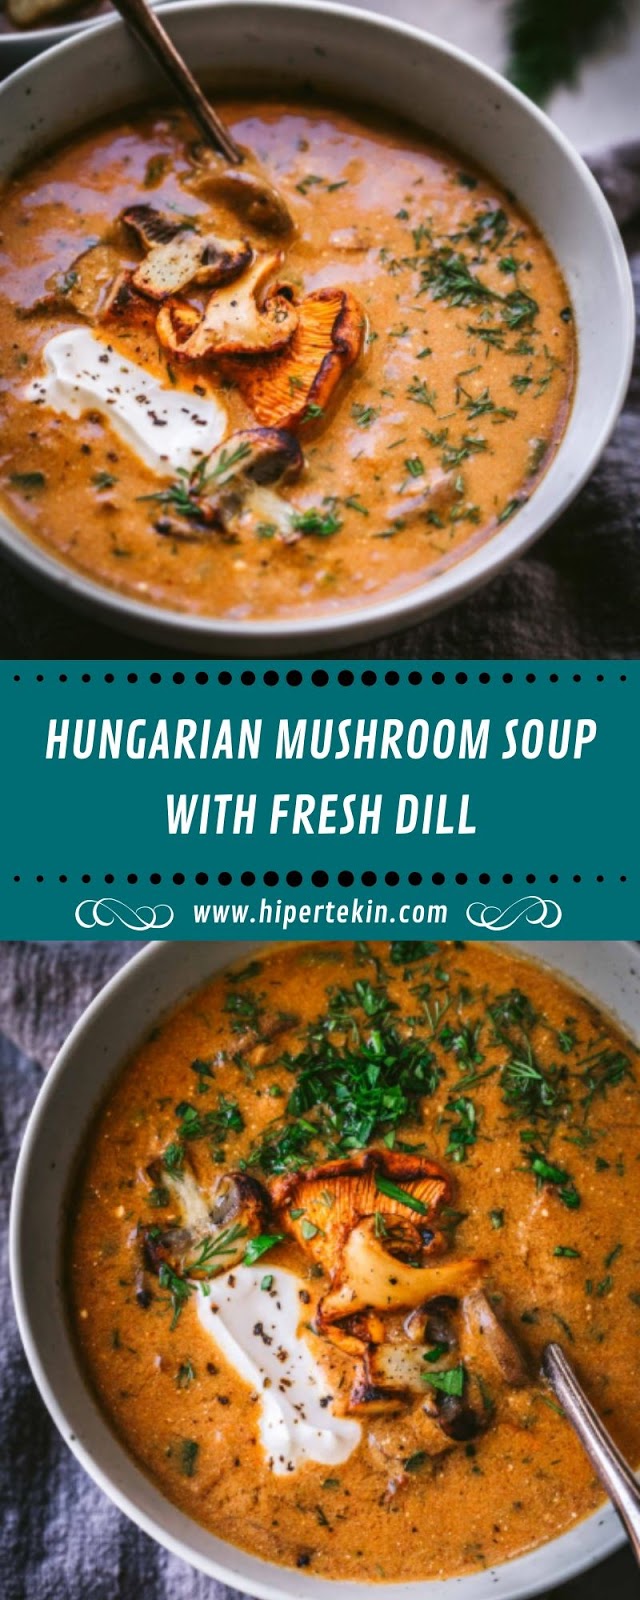 HUNGARIAN MUSHROOM SOUP WITH FRESH DILL